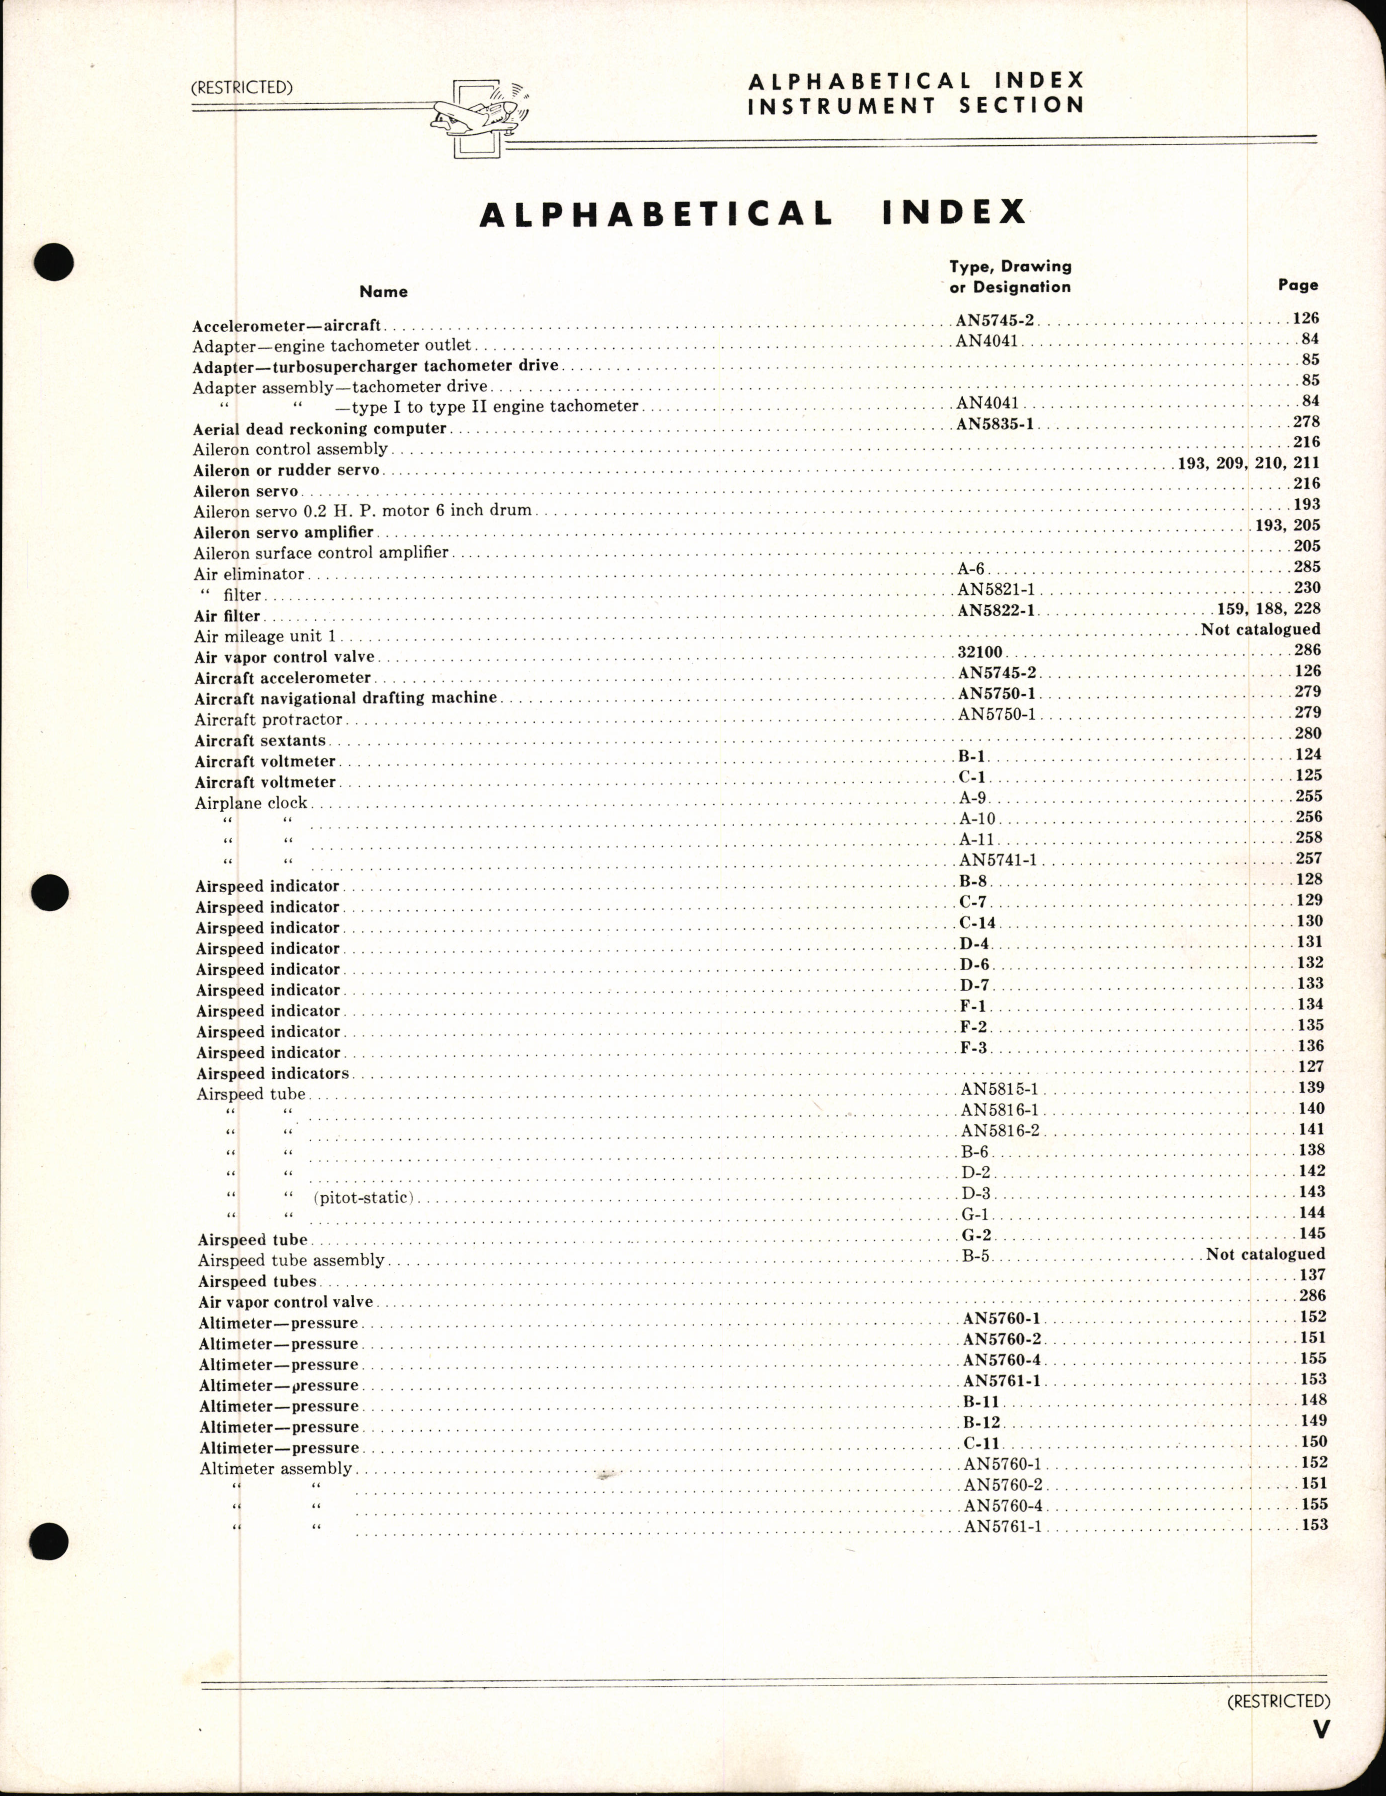 Sample page  6 from AirCorps Library document: Instruments - Index of Aeronautical Equipment - Volume 6